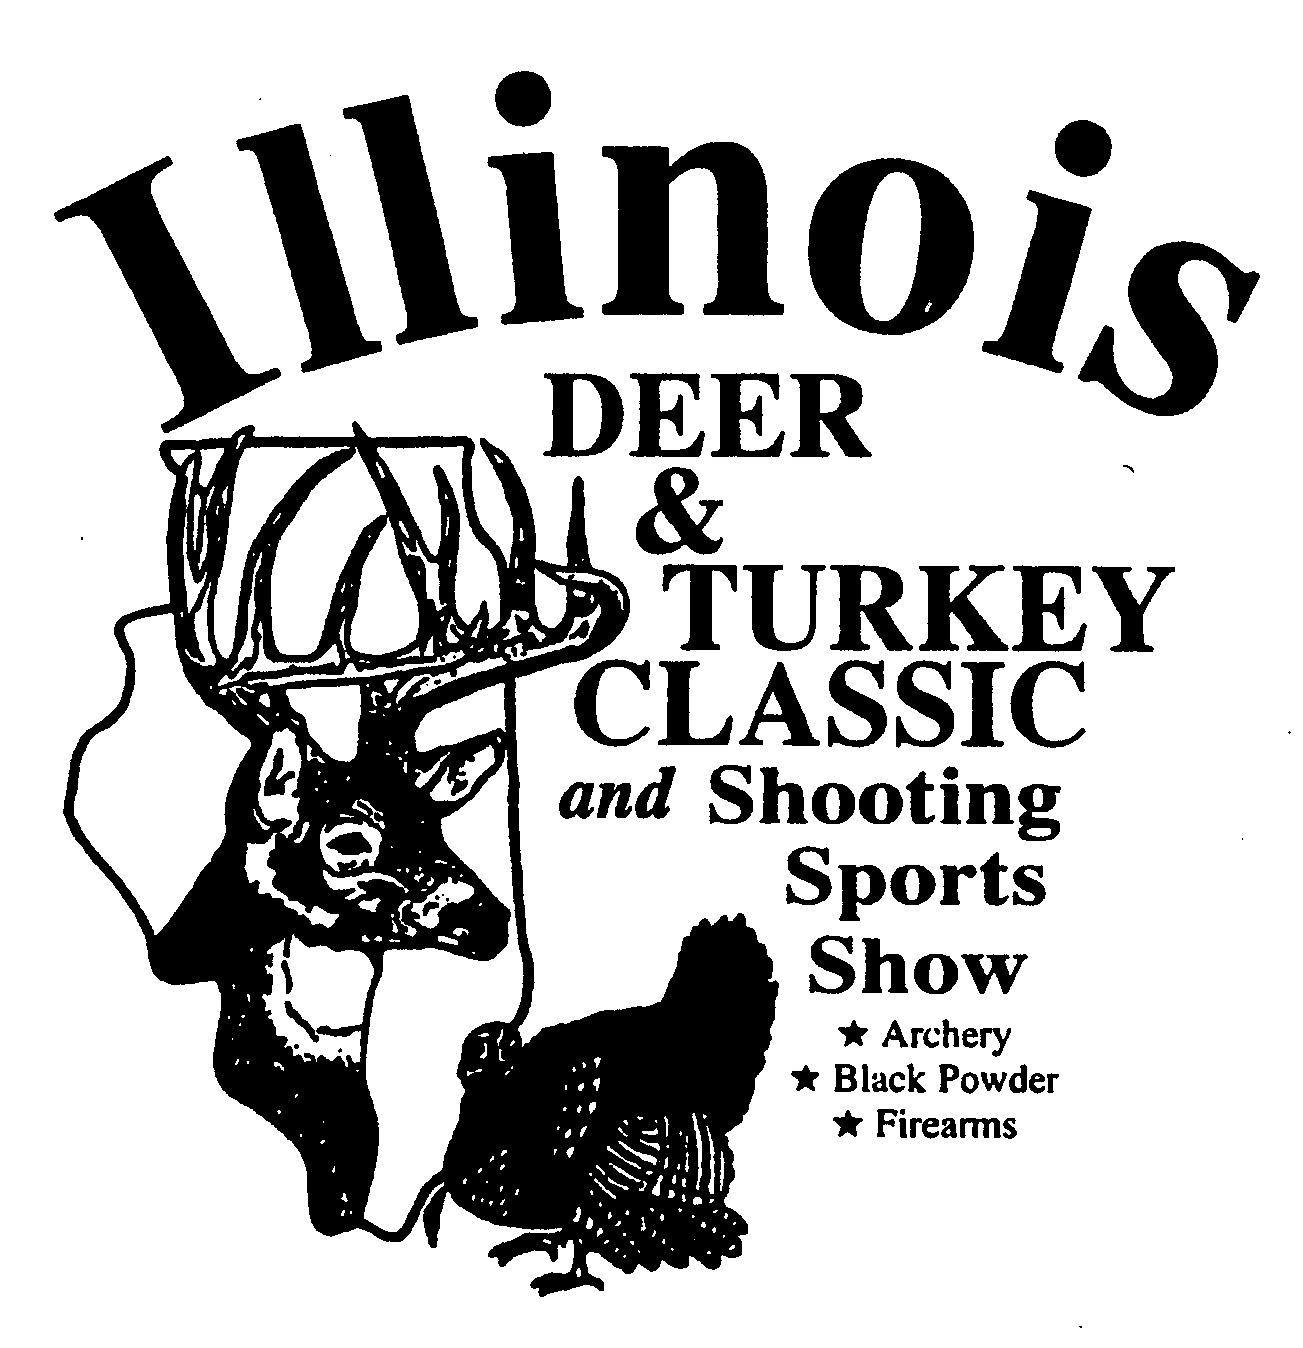  ILLINOIS DEER &amp; TURKEY CLASSIC AND SHOOTING SPORTS SHOW ARCHERY BLACK POWDER FIREARMS